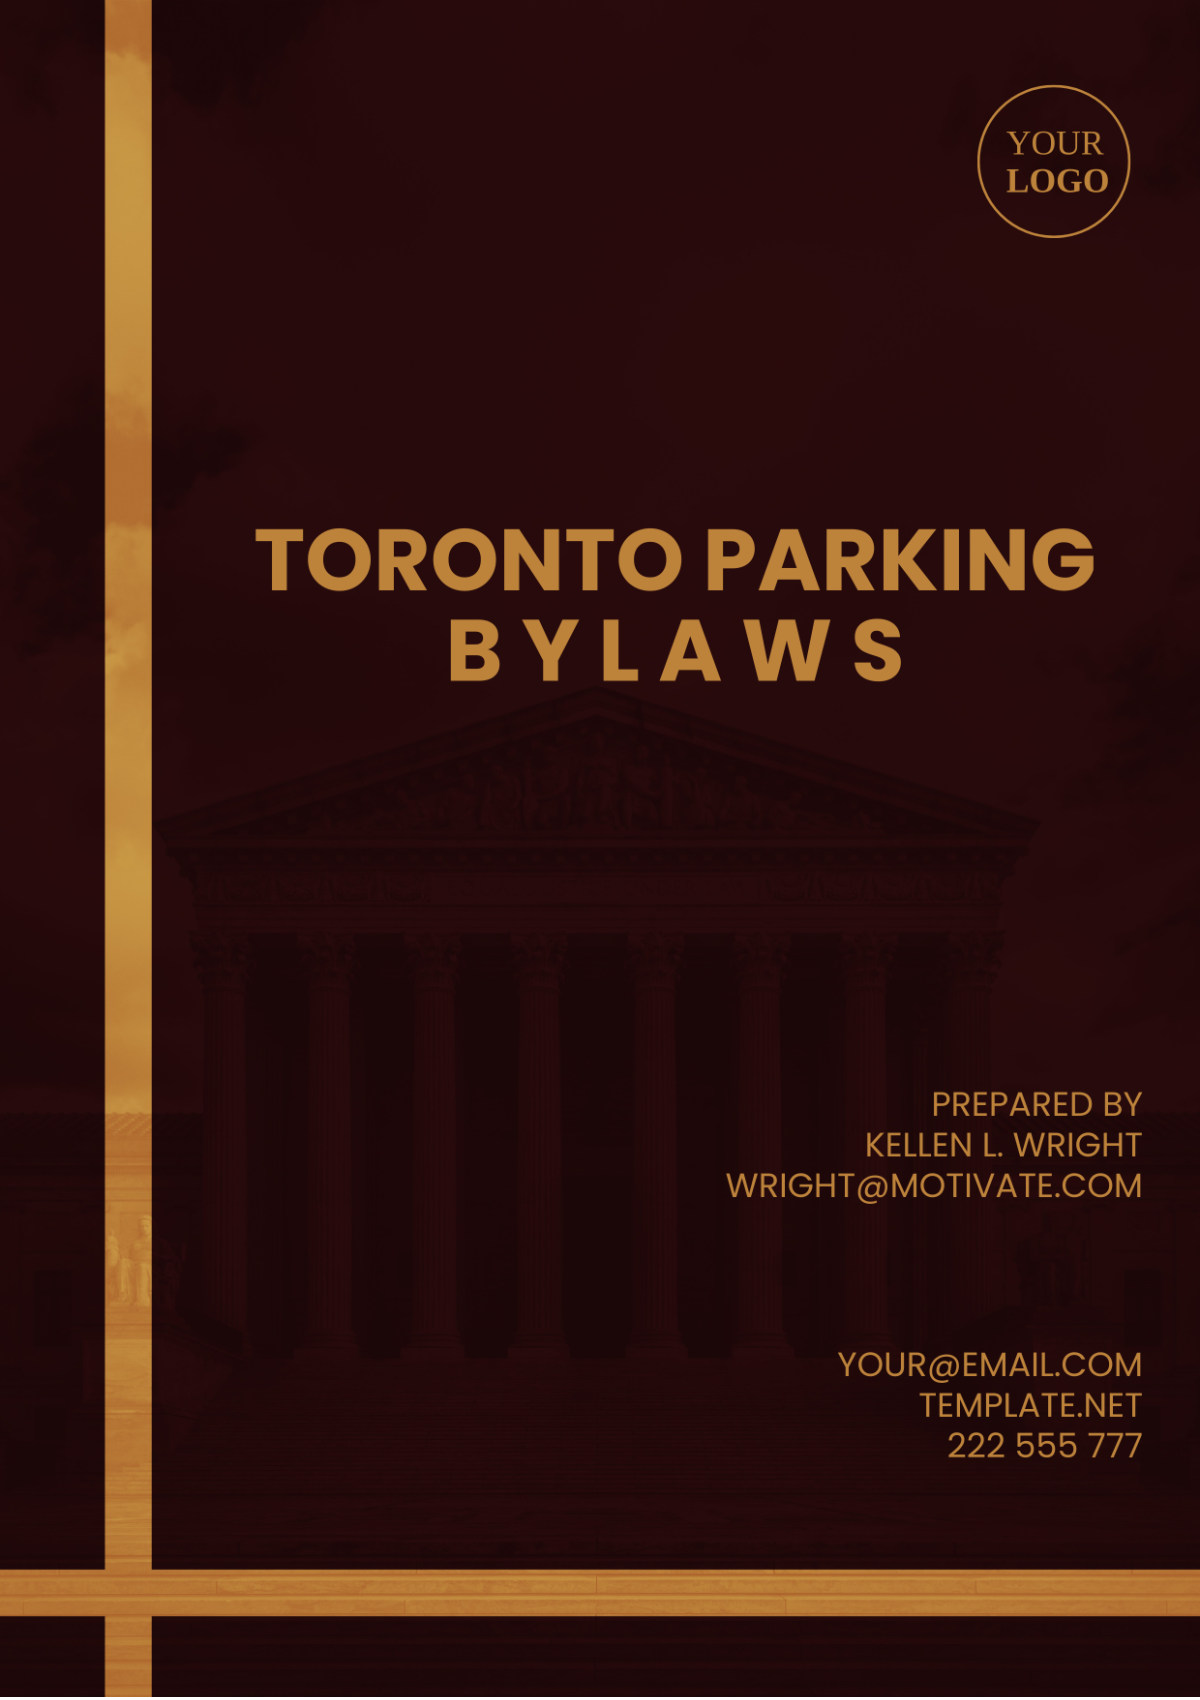 Toronto Parking Bylaws Template